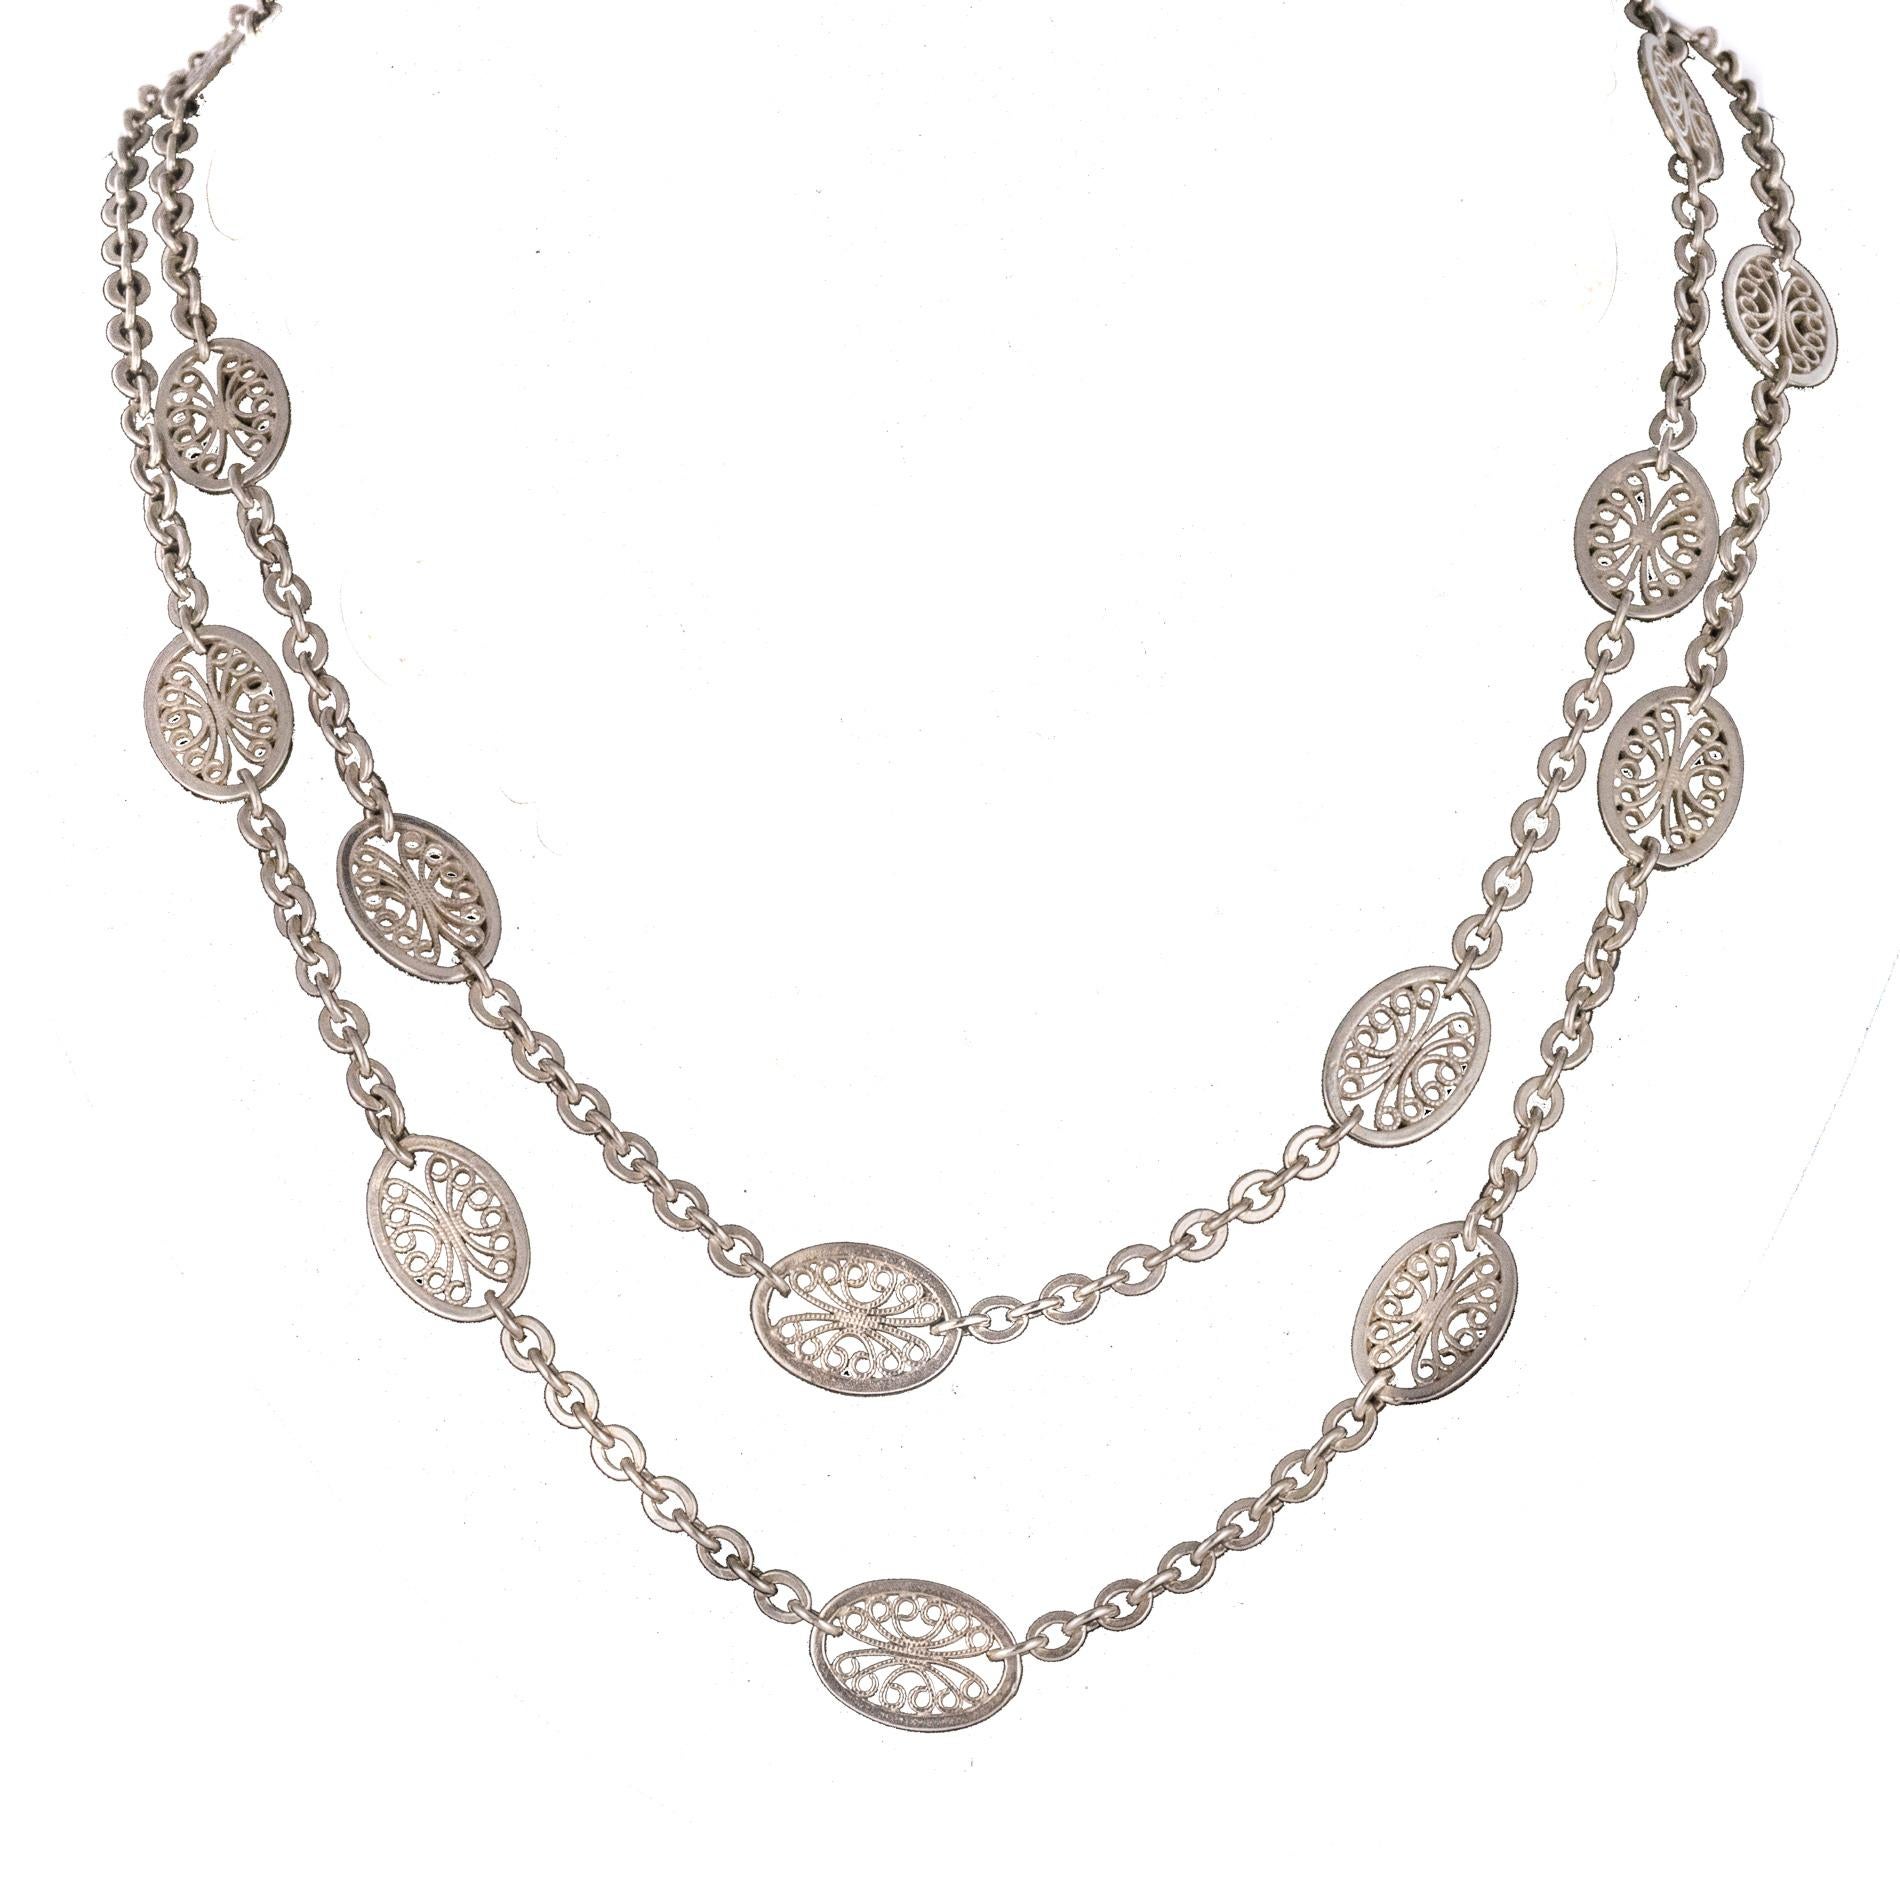 Belle Époque French 1900s Silver Filigree Long Necklace